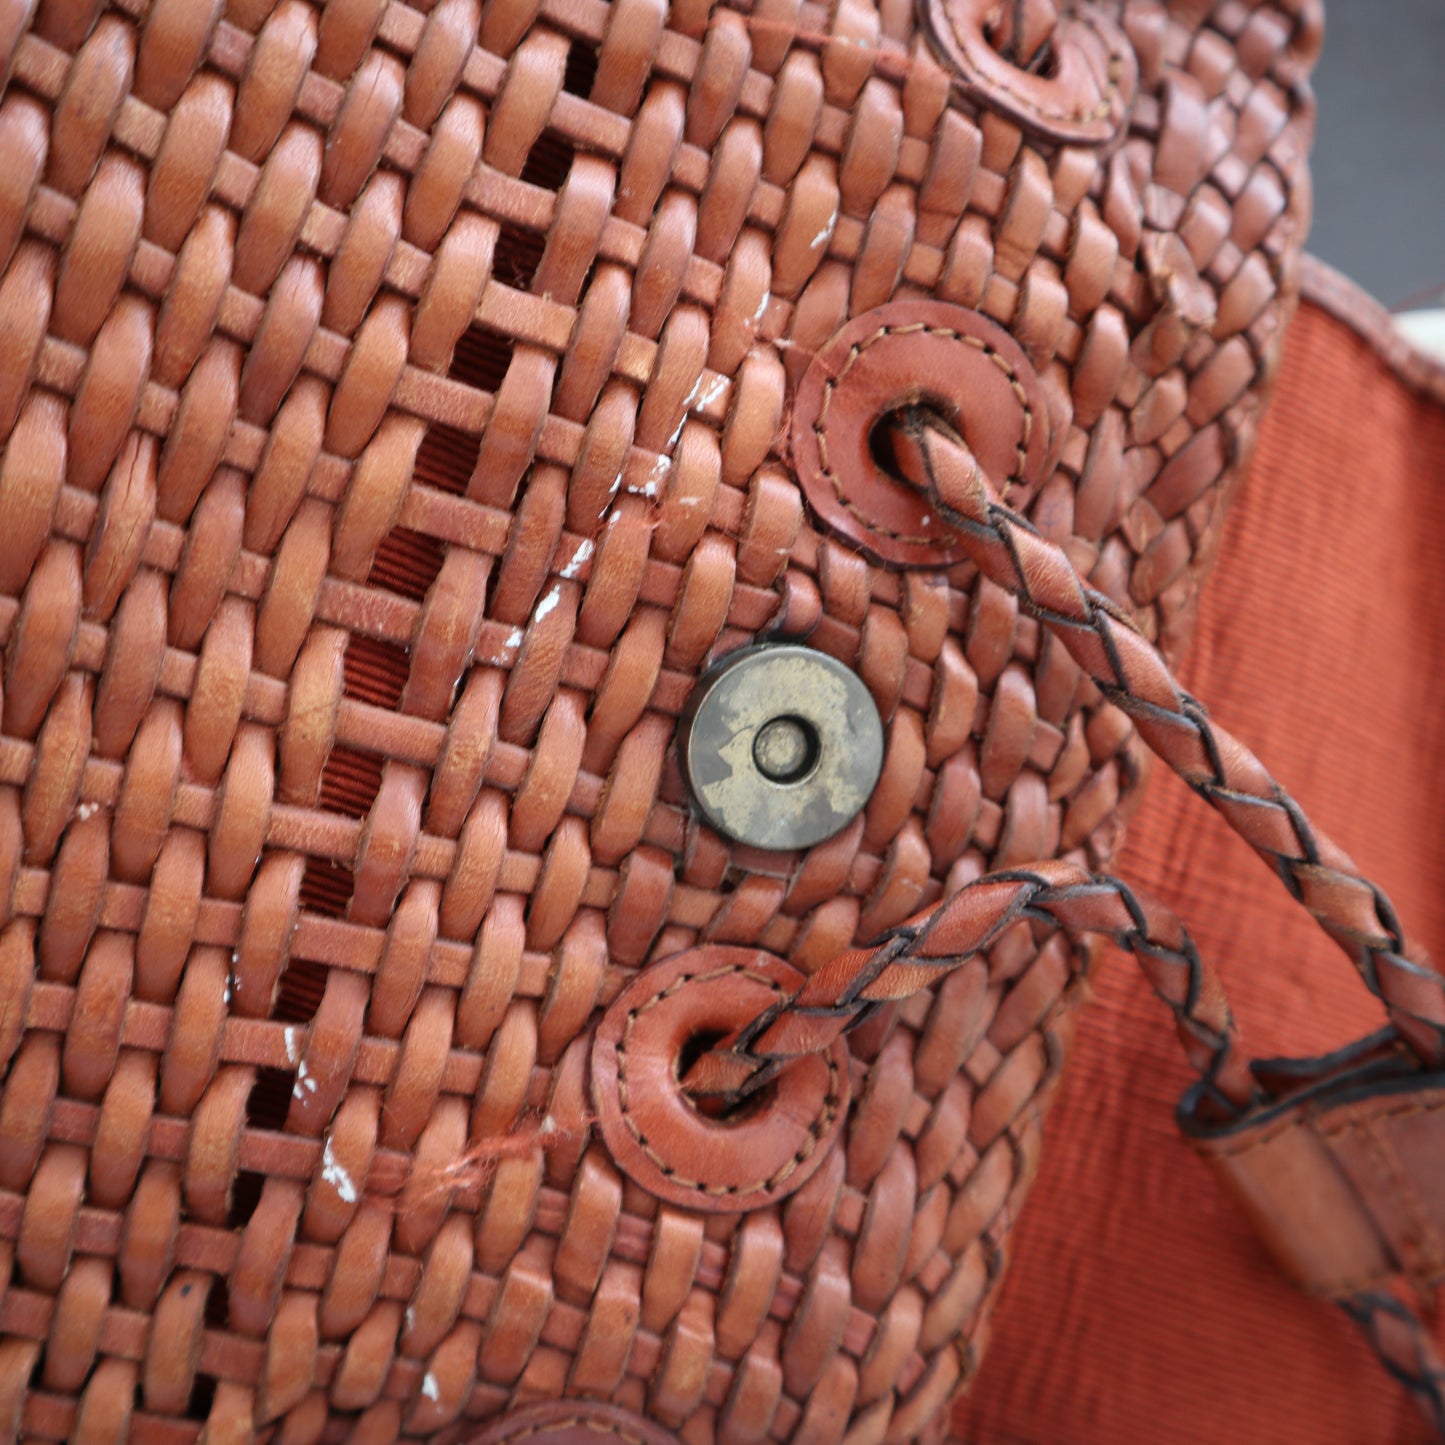 New Accessories: Genuine Leather Woven Backpack - Thrift Happens 2